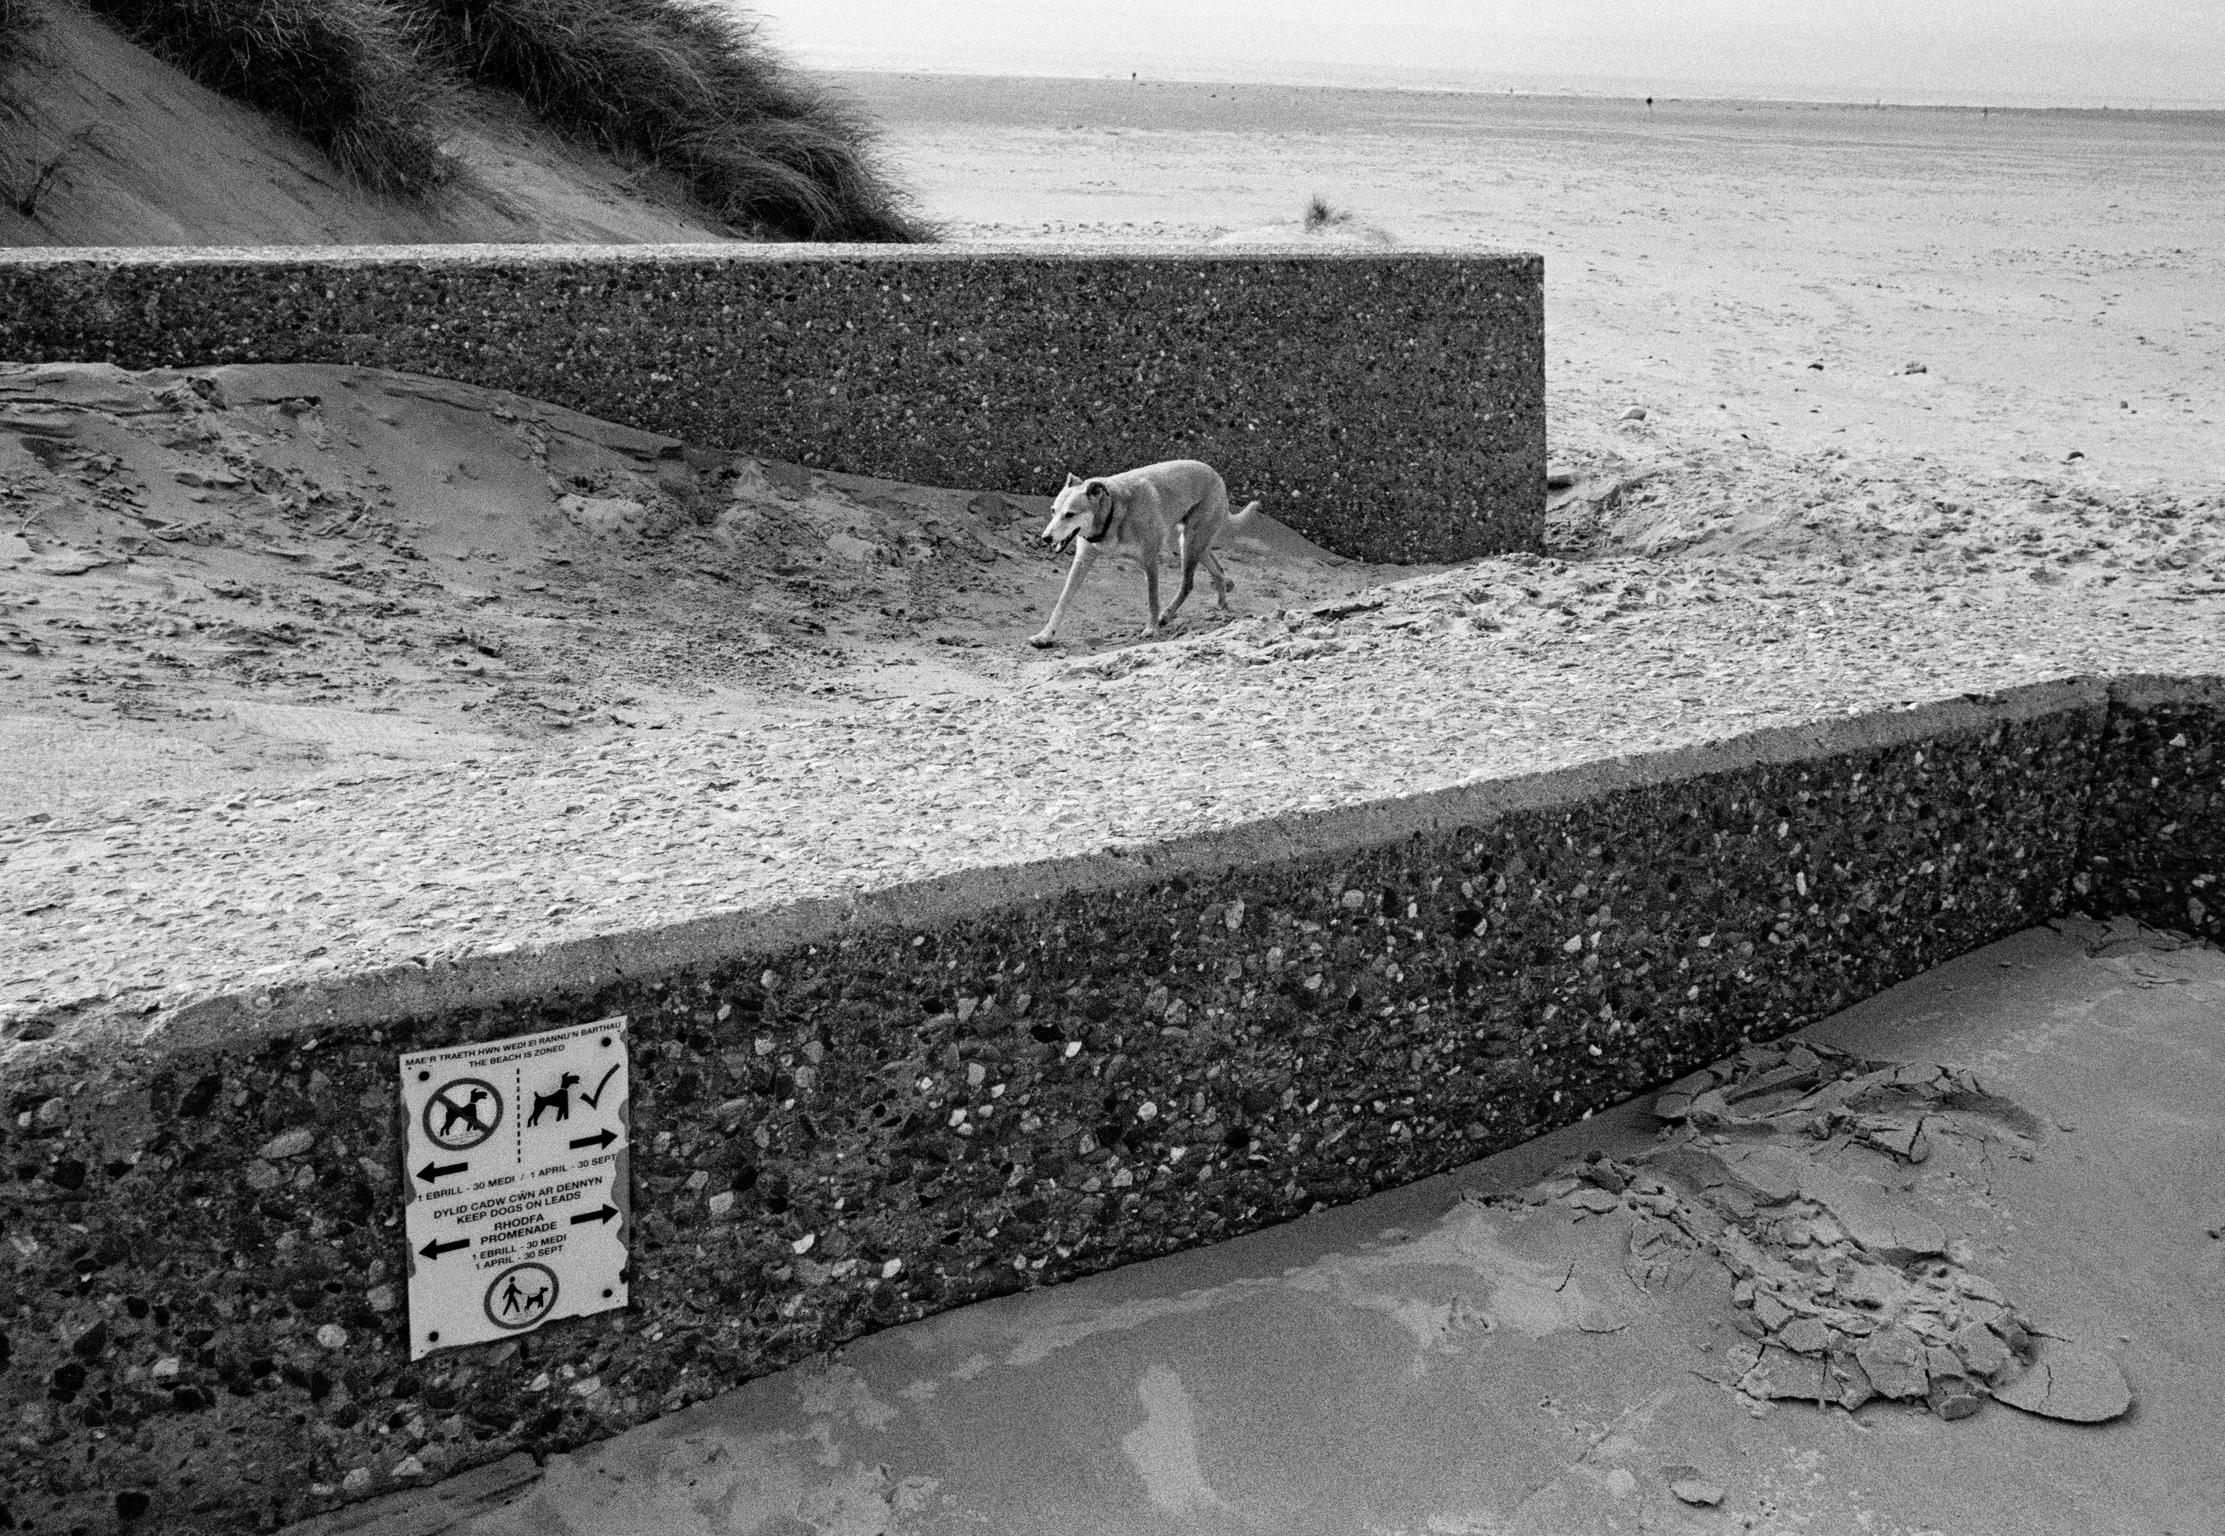 Dog walking into trouble on Barmouth beach, Wales